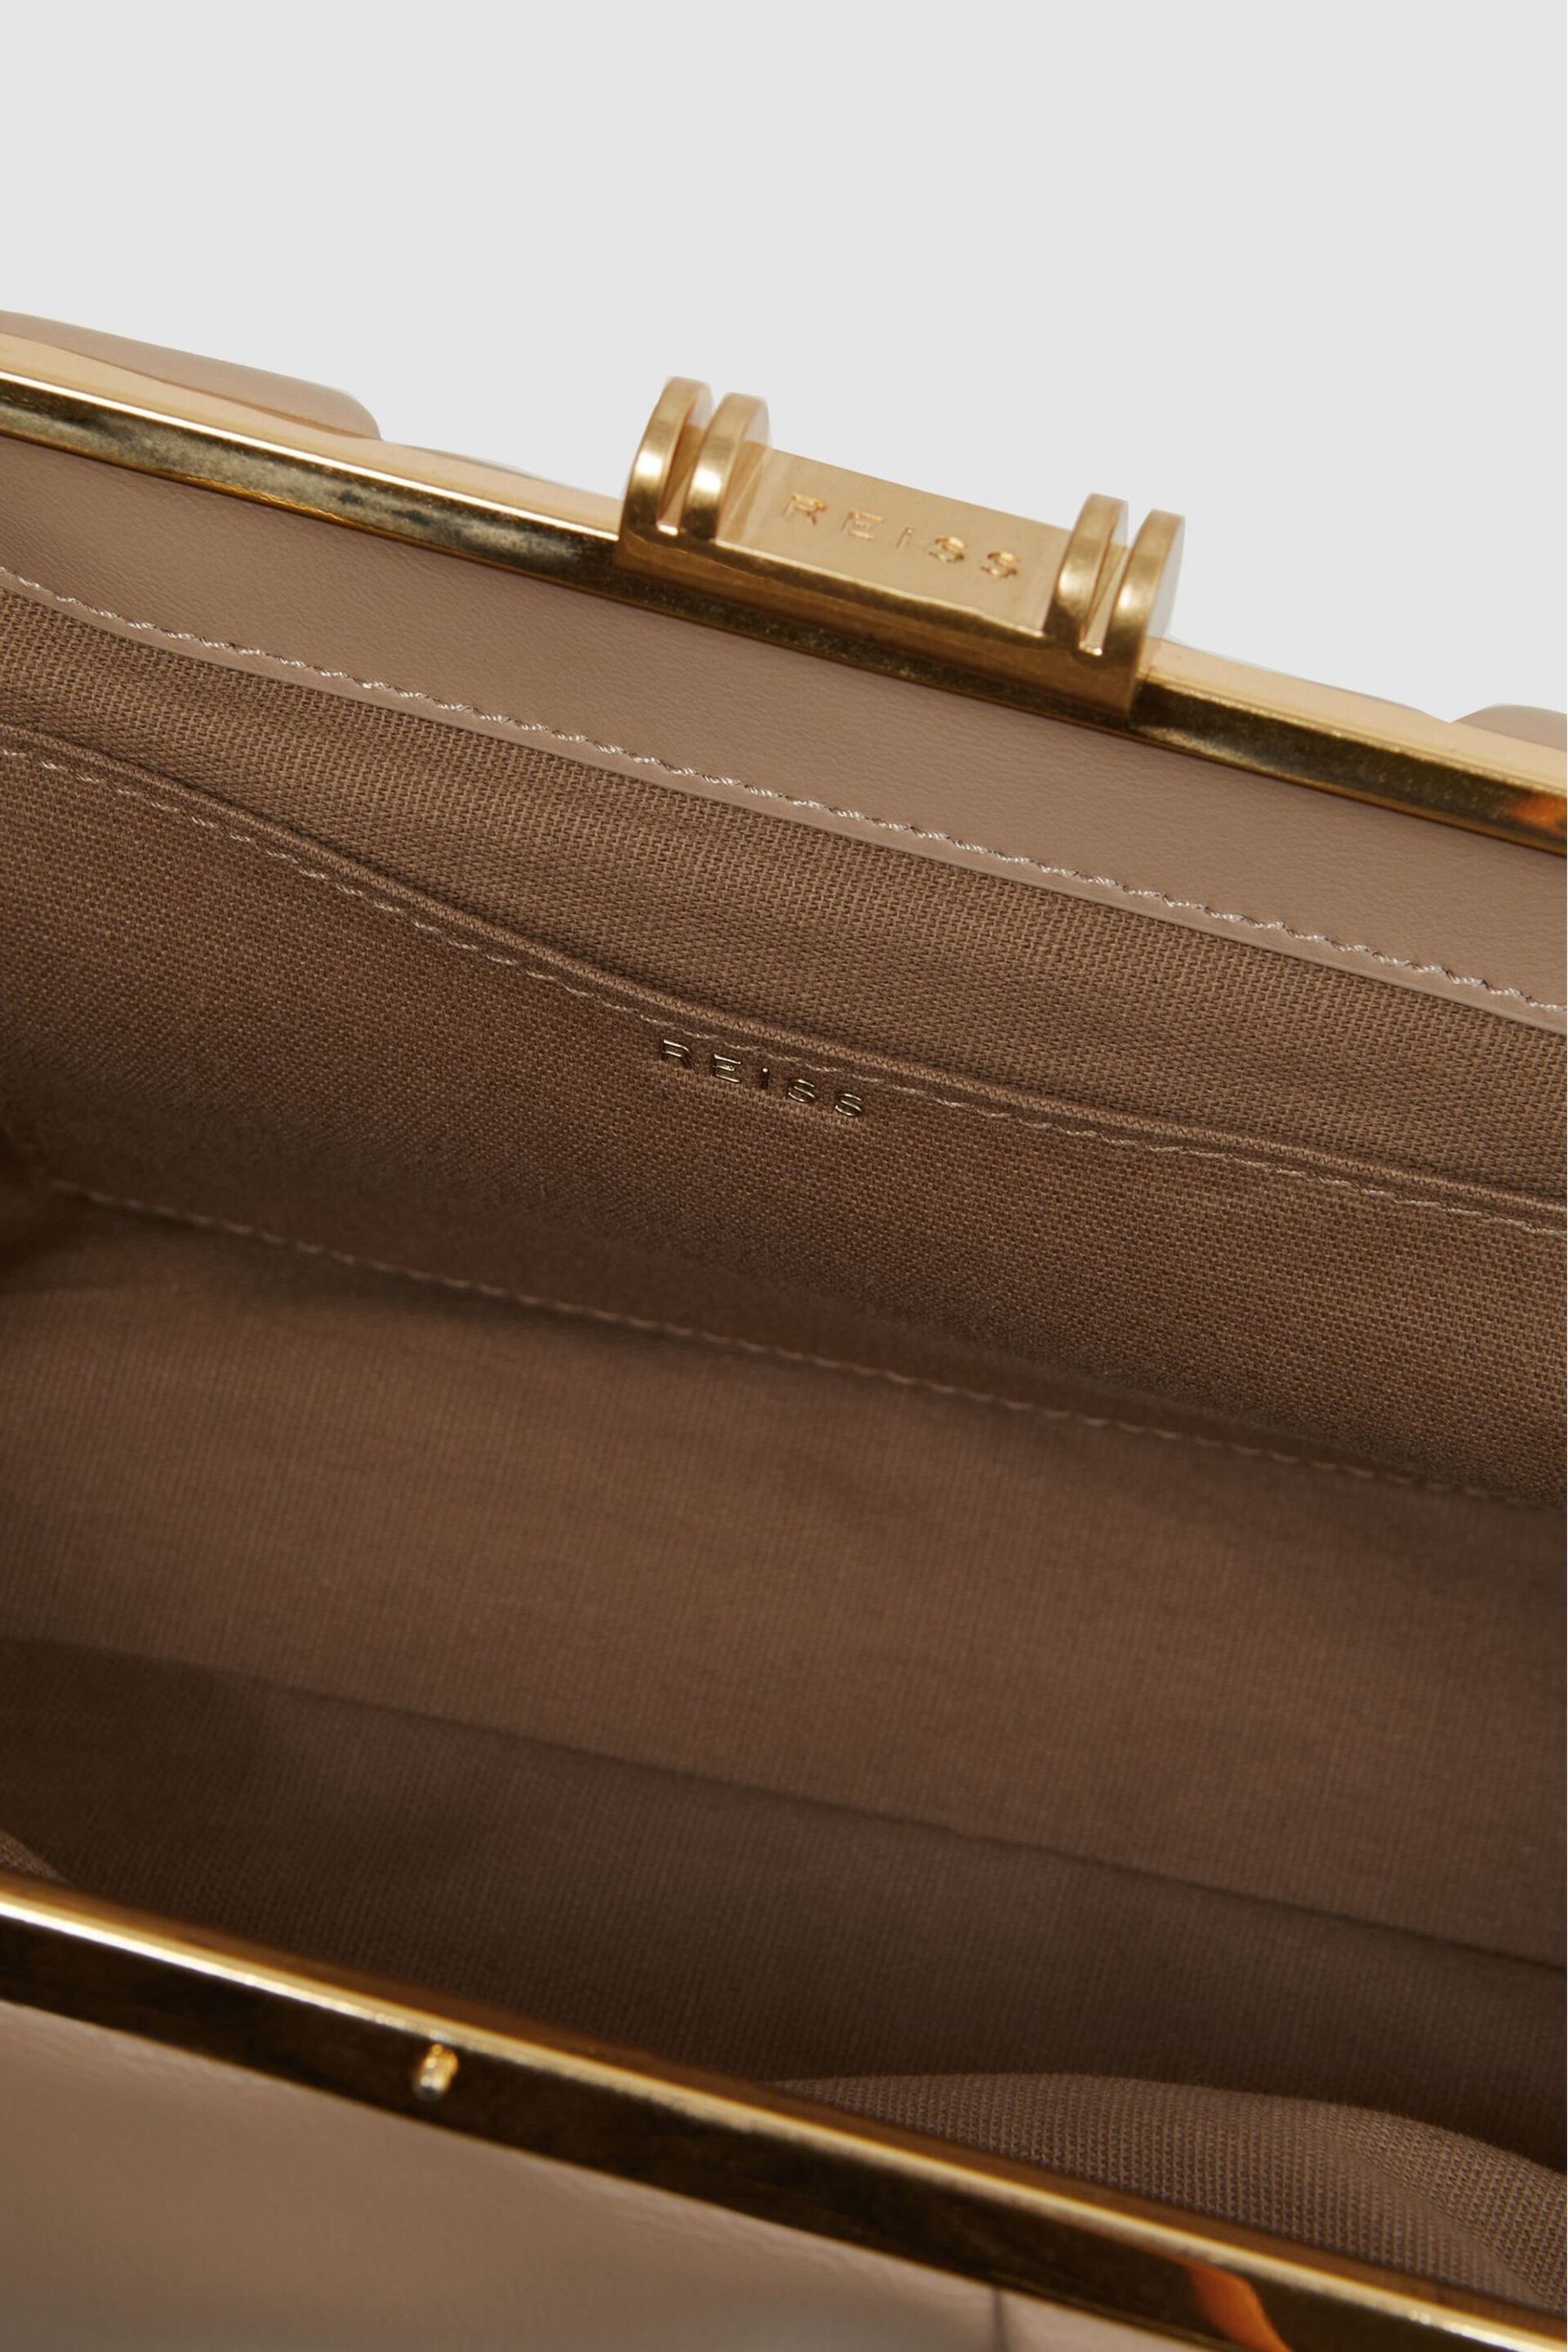 Reiss Taupe Madison Leather Clutch Bag - Image 3 of 5